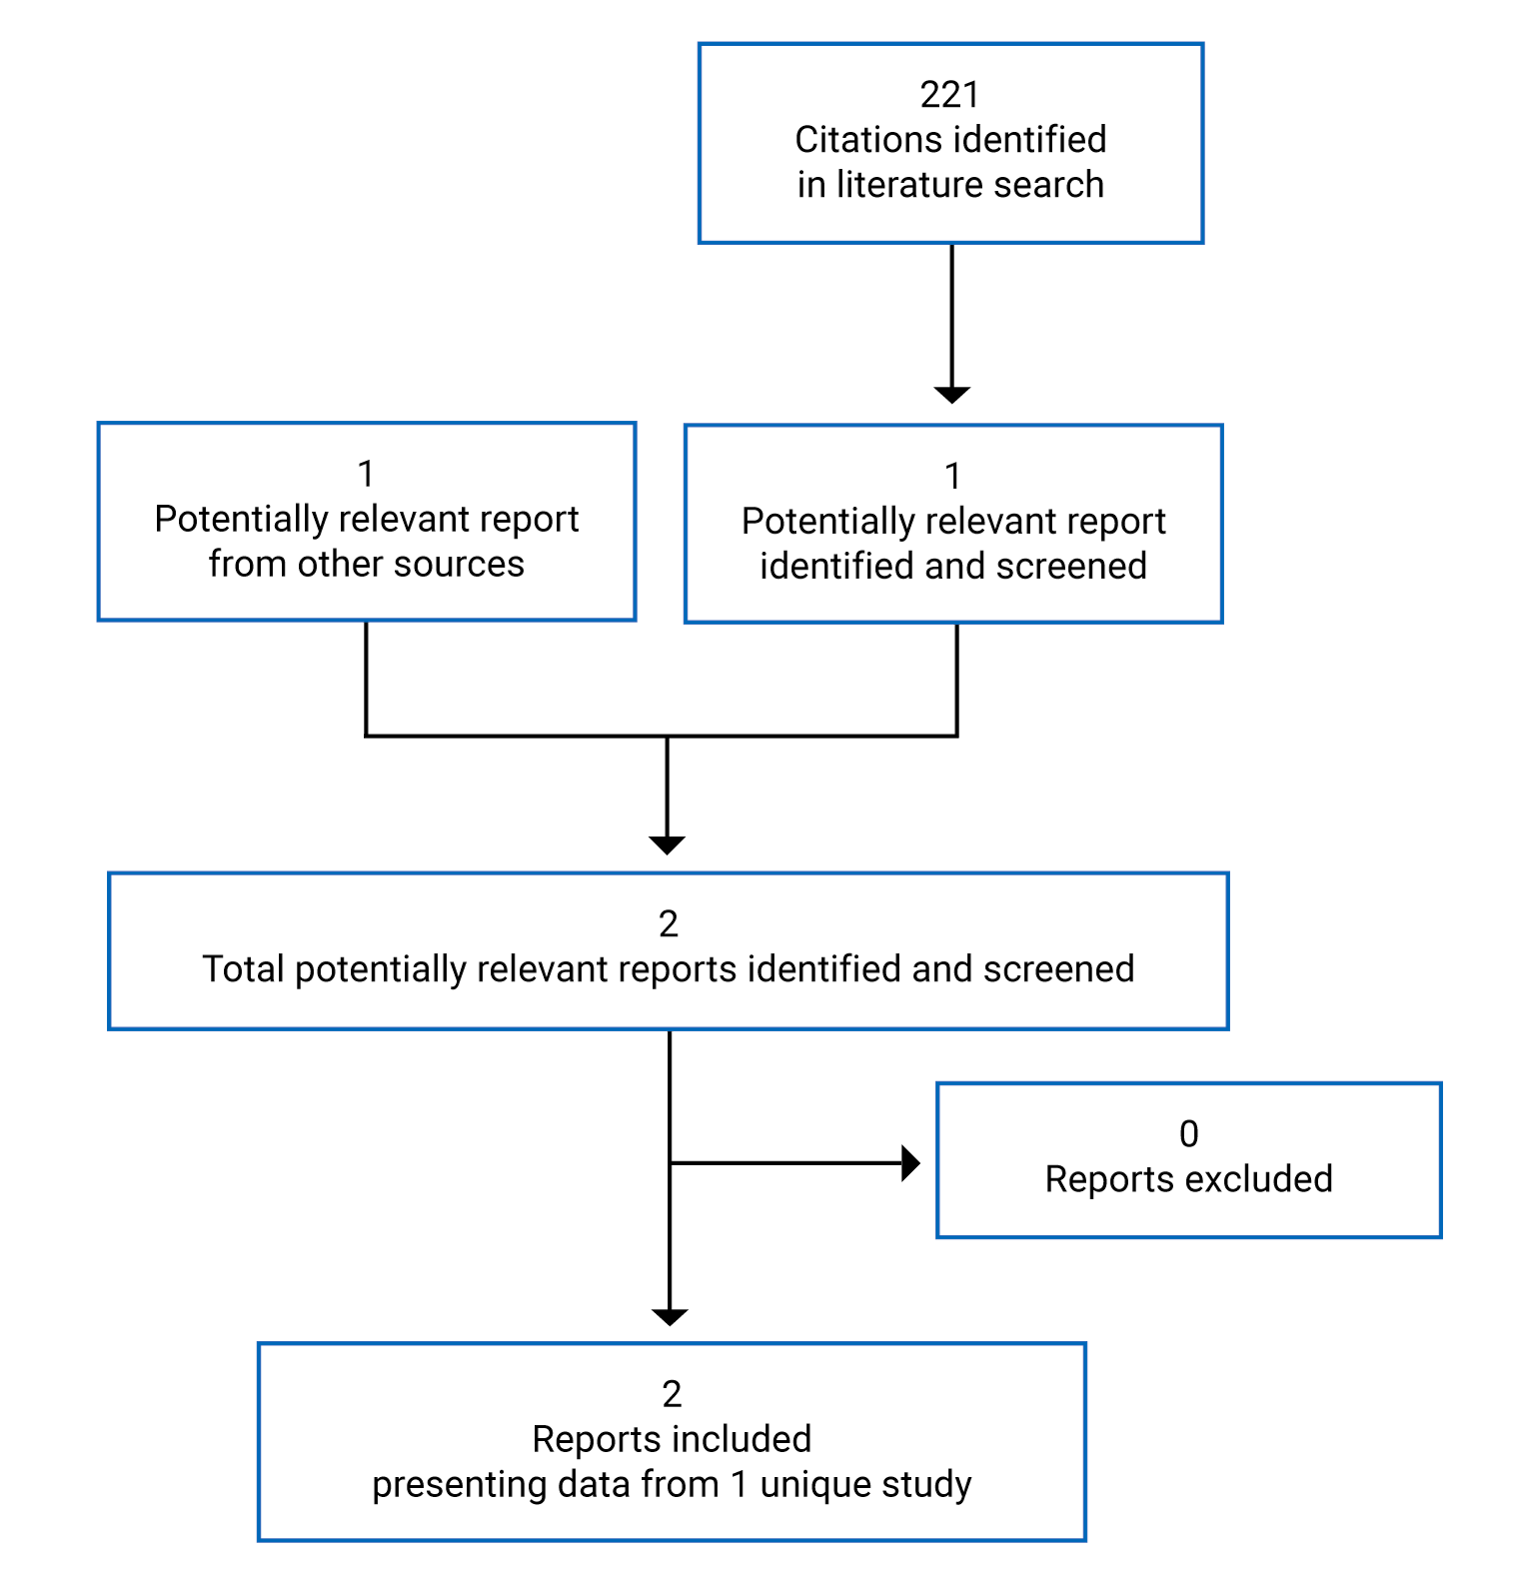 A total of 221 citations were identified in the literature search, from which 1 potentially relevant report were identified. One additional potentially relevant report was identified from other sources. Of the 2 potentially relevant full-text reports retrieved for scrutiny, 0 were excluded. Two reports presenting data from 1 unique study were included in the review.